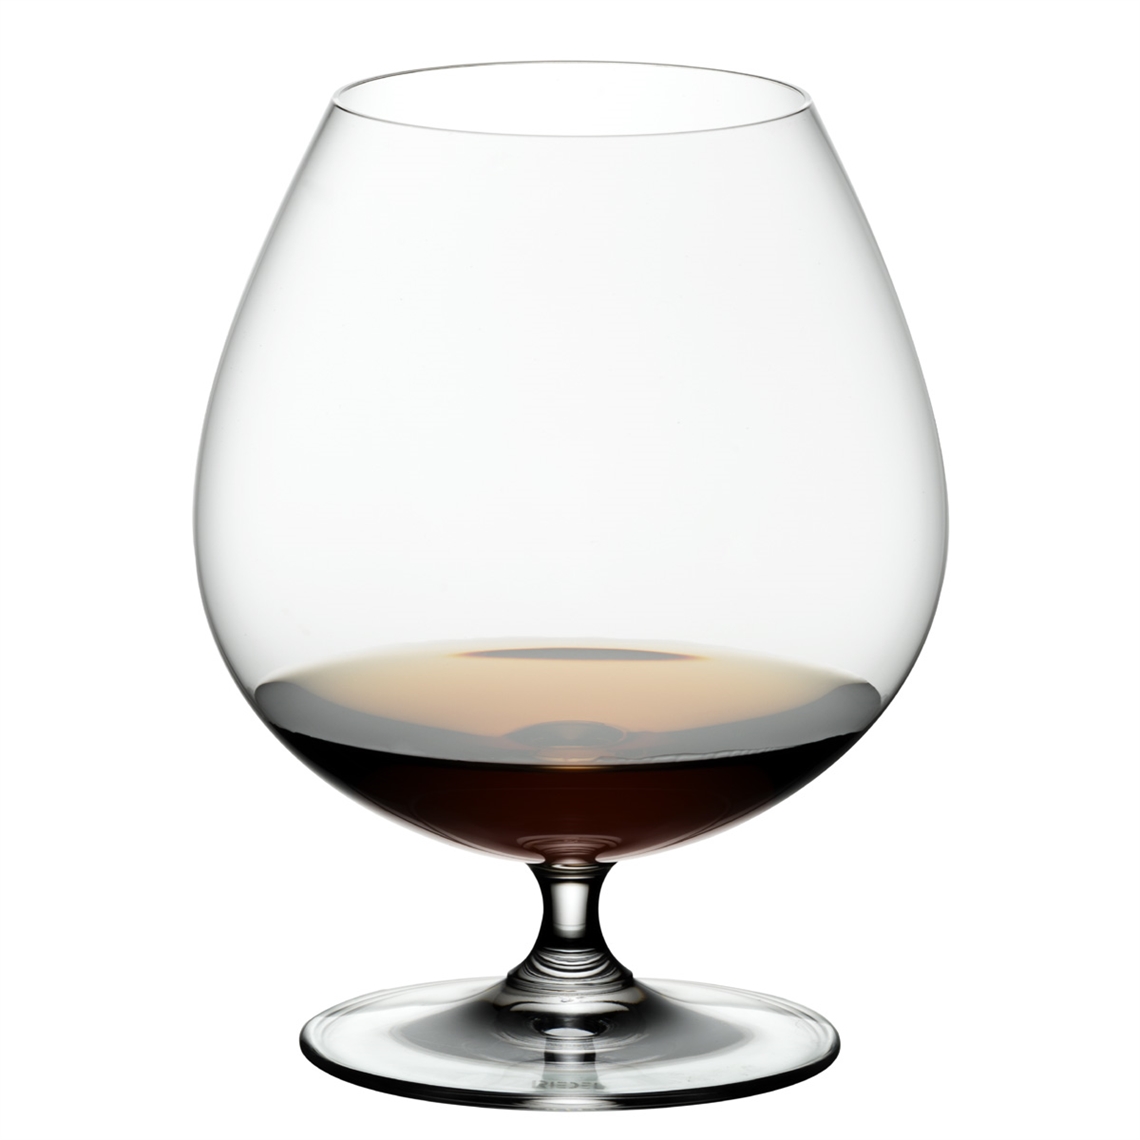 View more long drink & tumblers from our Spirit Glasses range